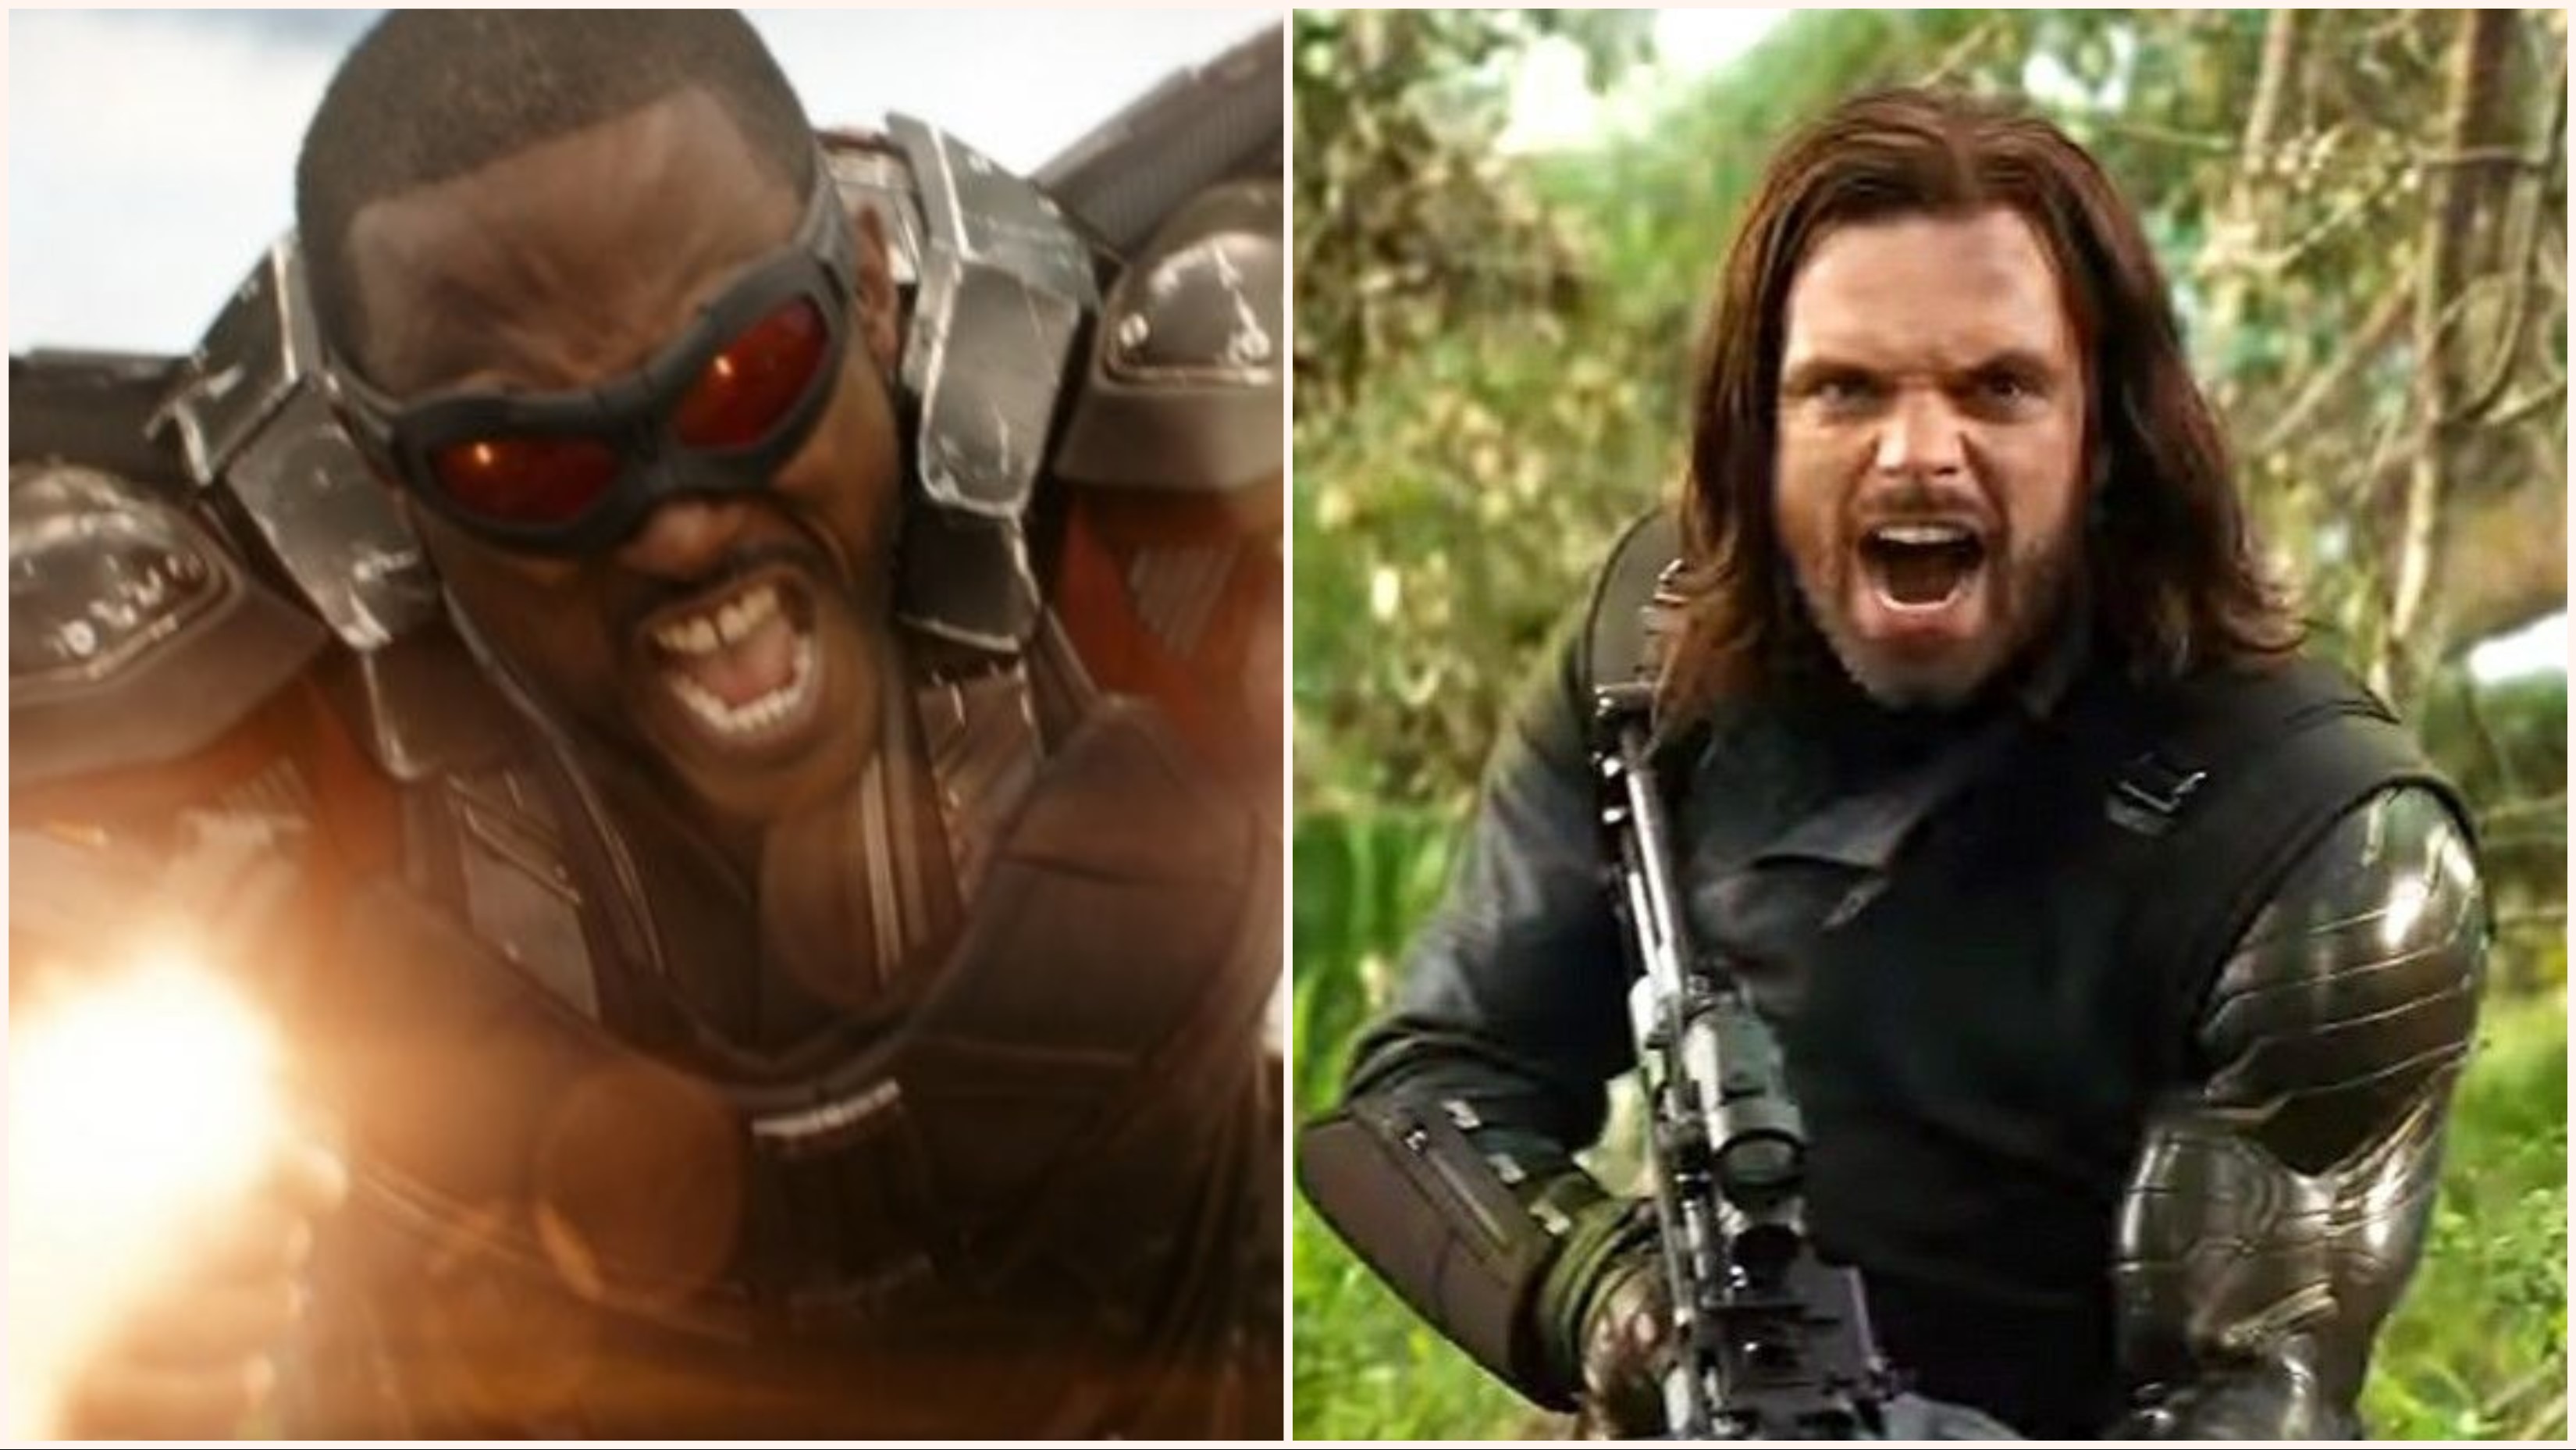 Writer Malcolm Spellman (Empire) has been tapped to develop a series based on the duo of Bucky Barnes, aka the Winter Soldier, and Sam Wilson, aka the Falcon.